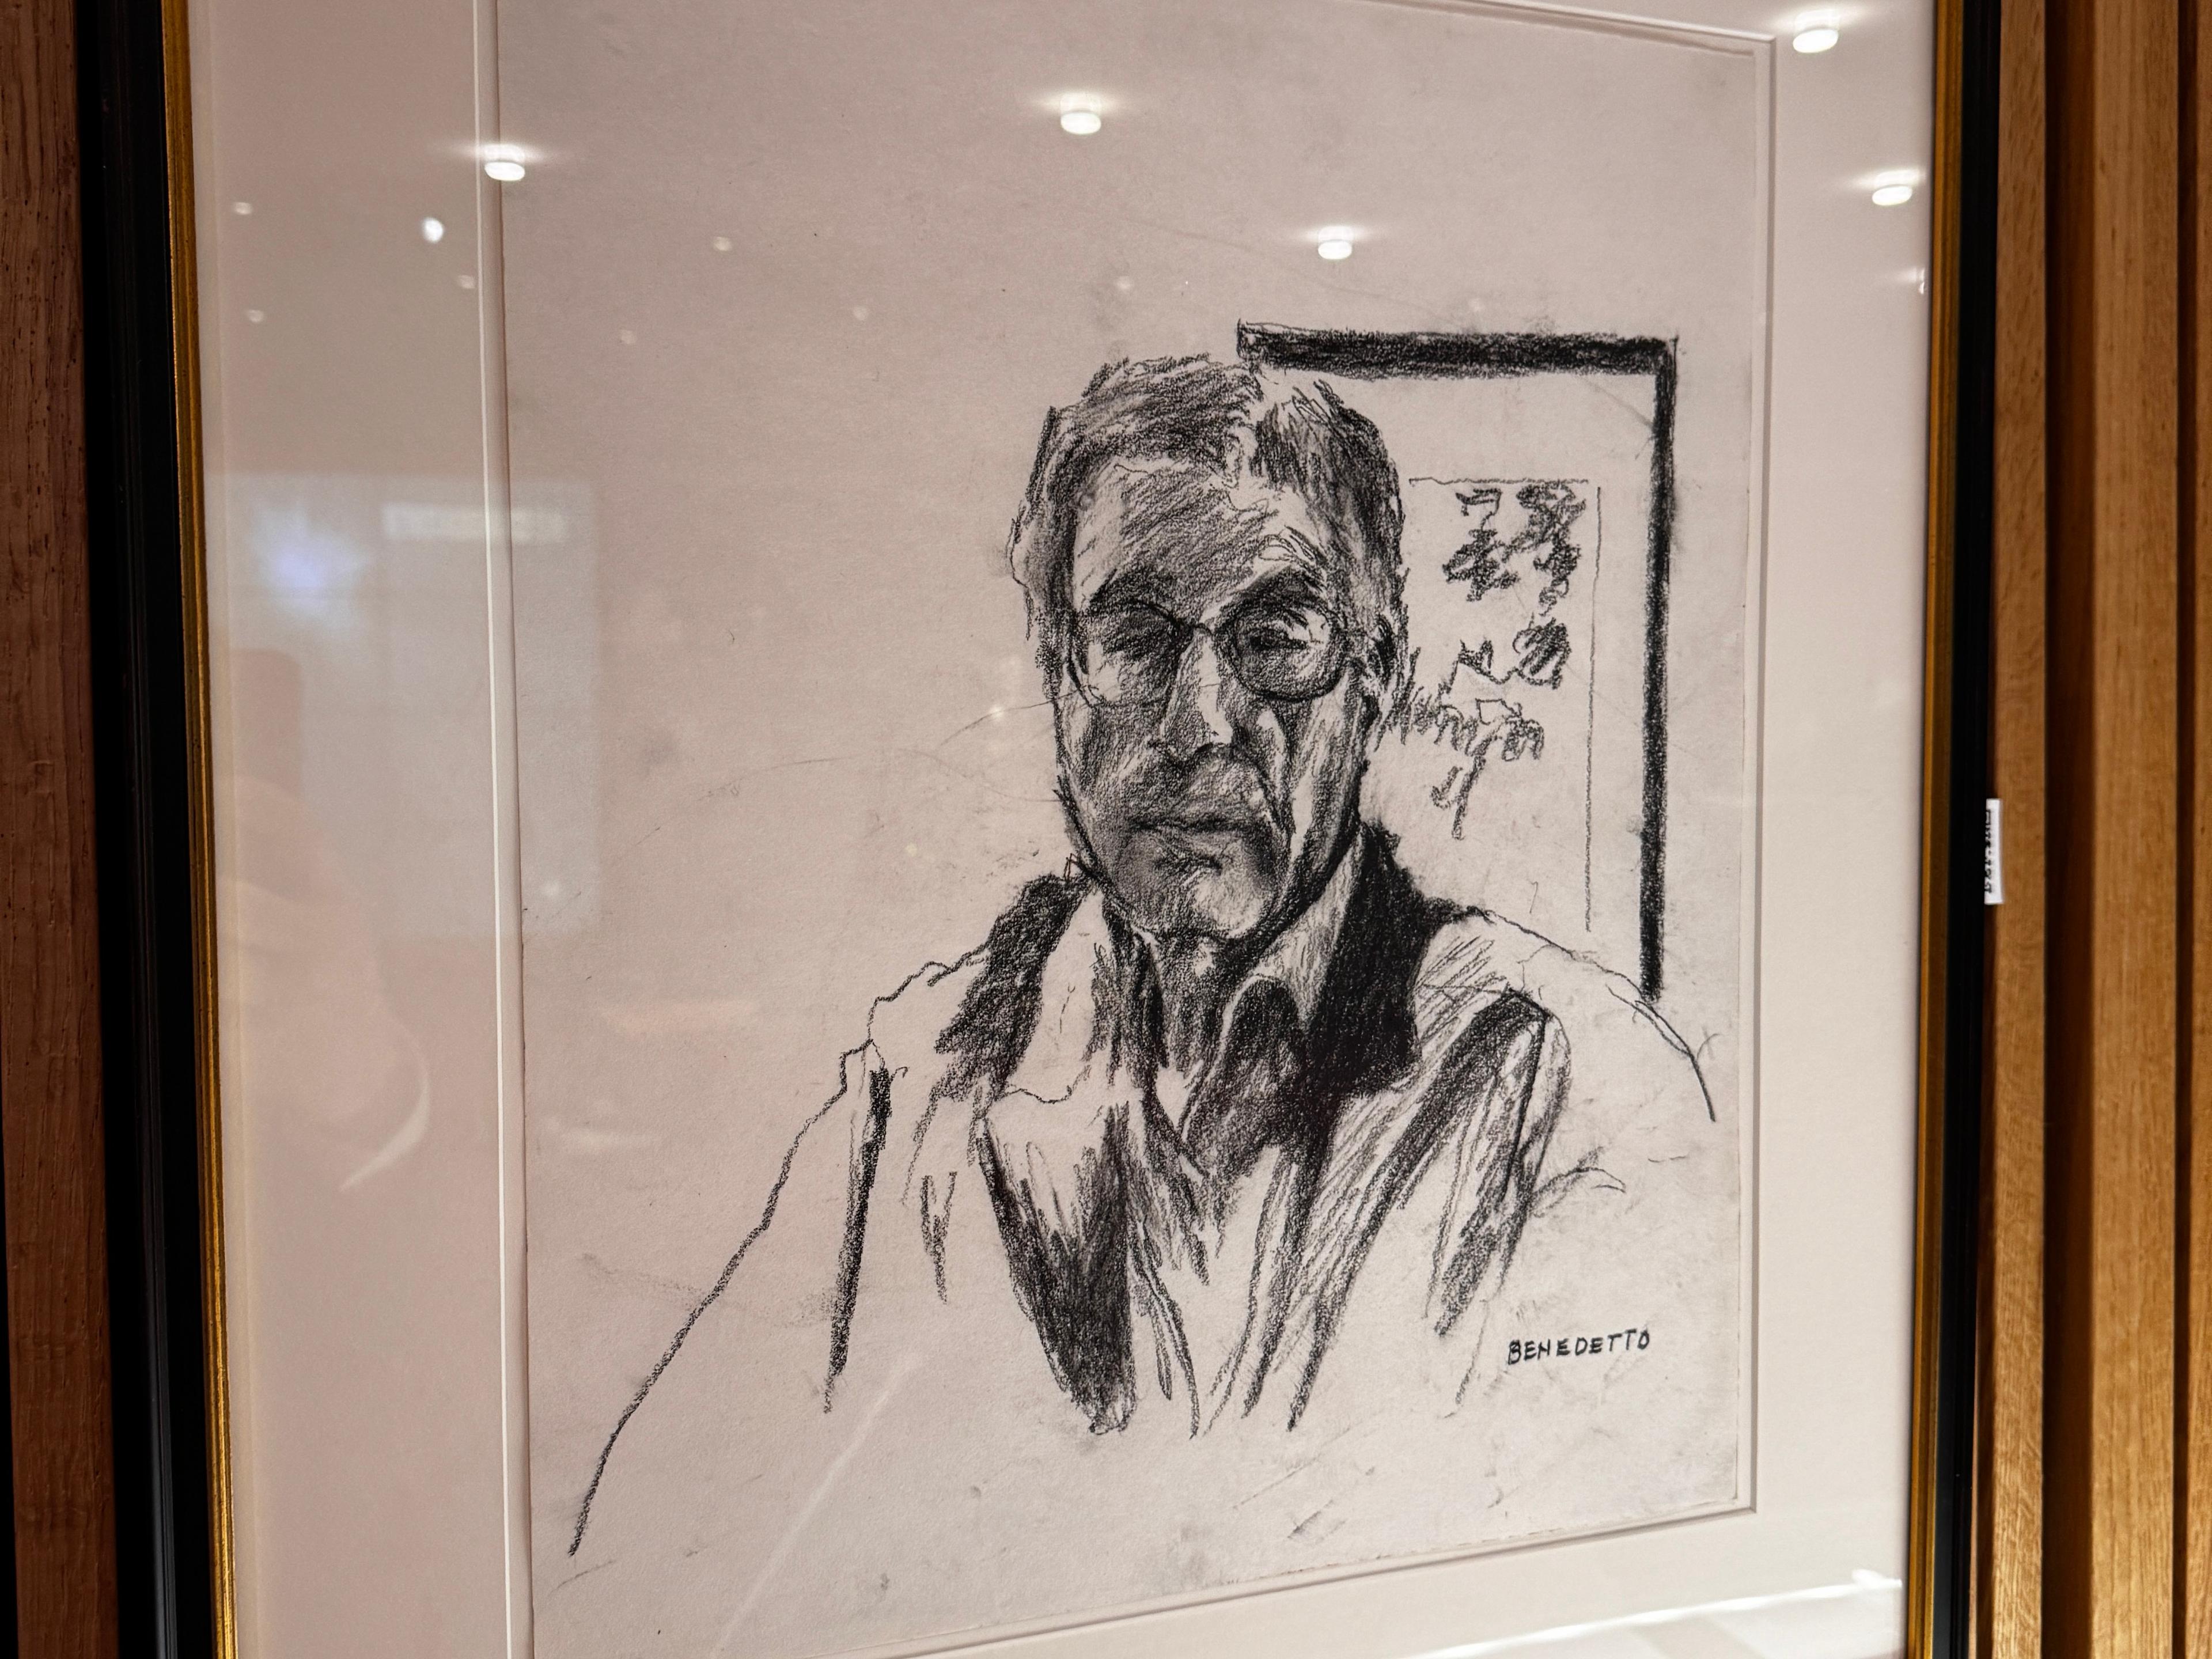 A framed black and white drawing